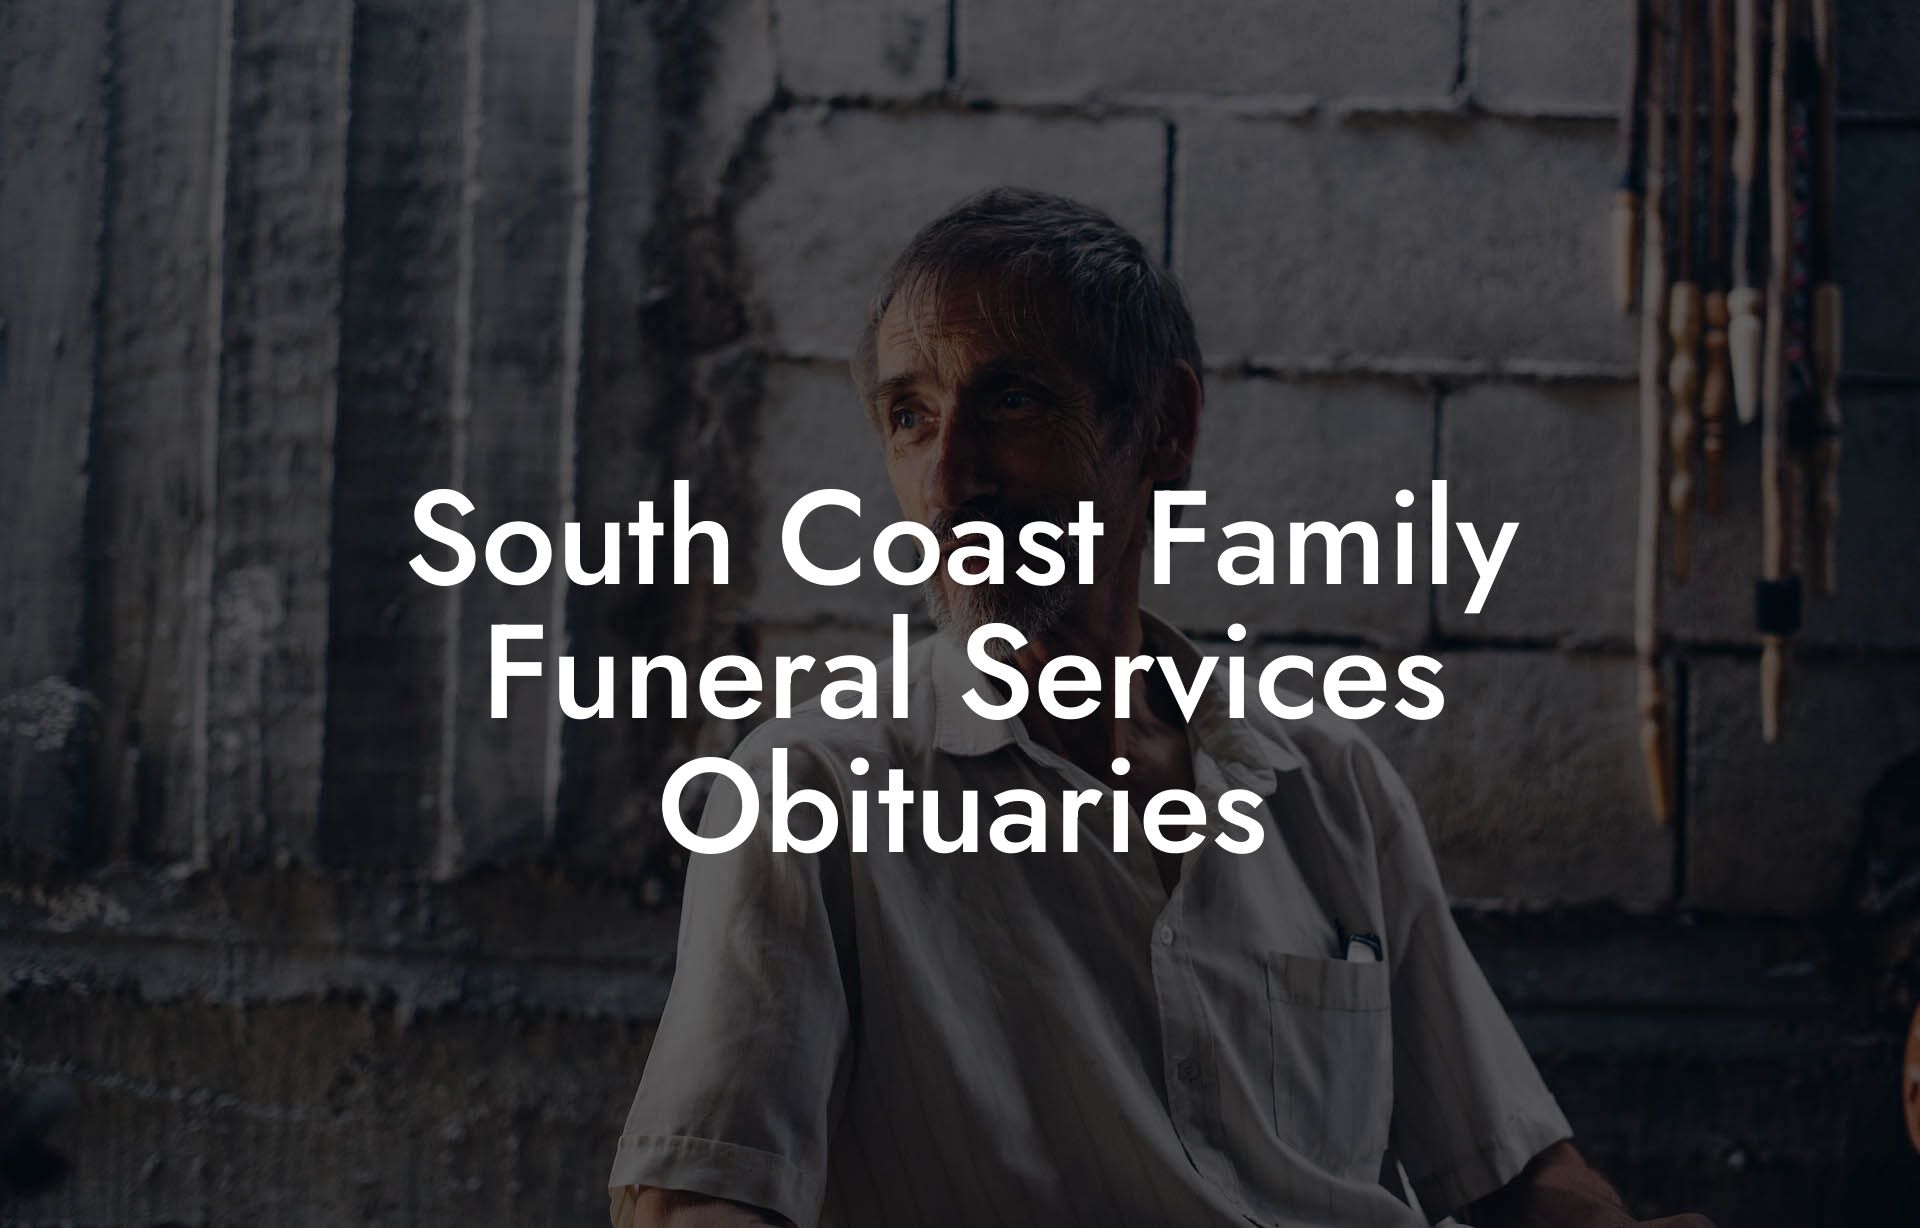 South Coast Family Funeral Services Obituaries